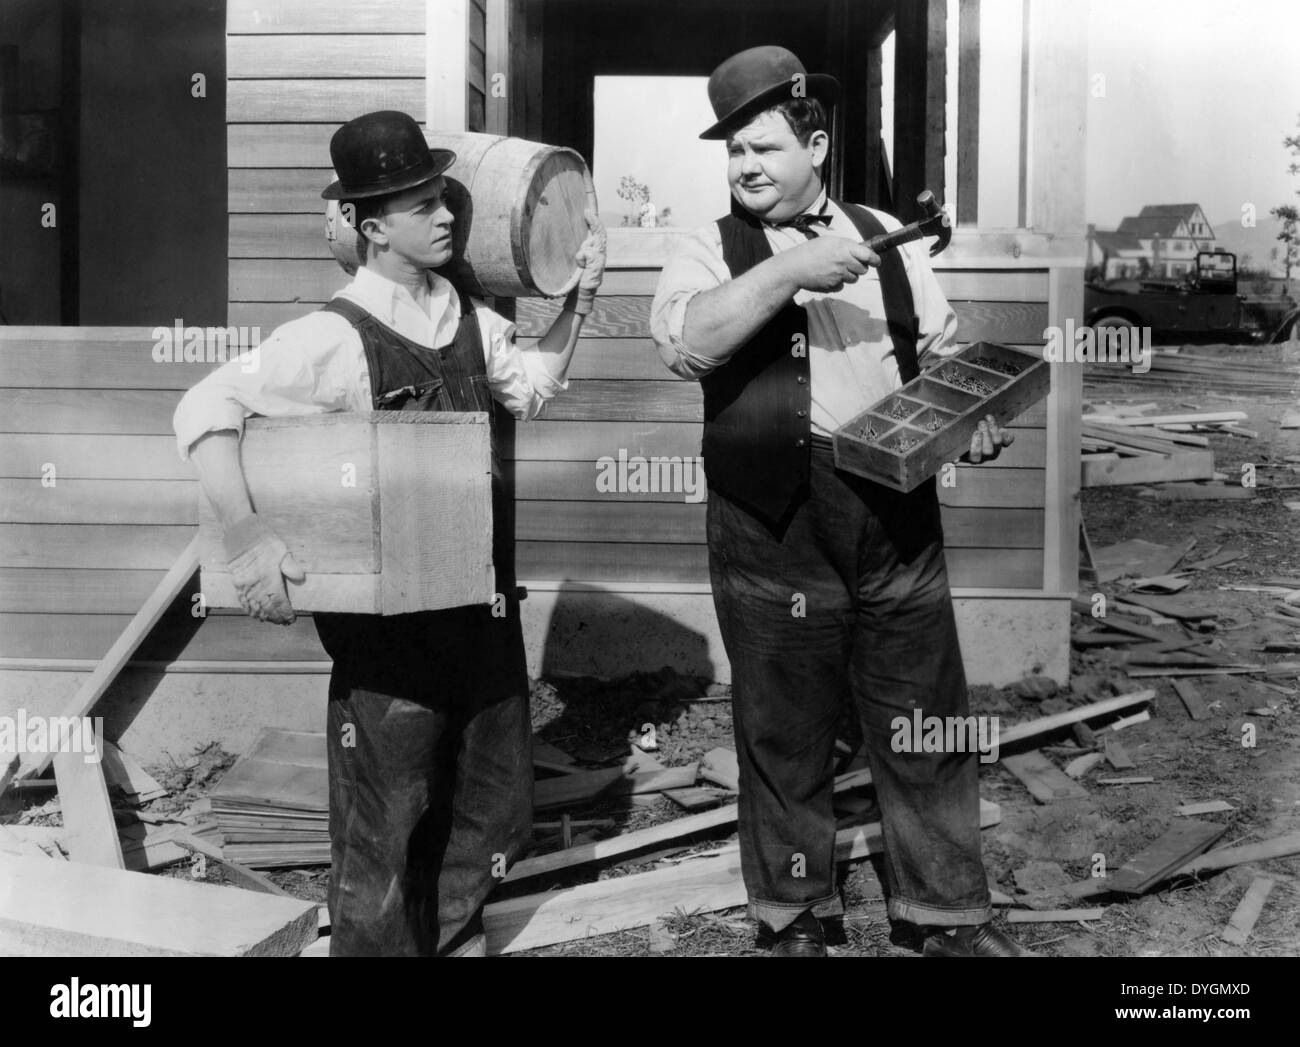 THE FINISHING TOUCH (1928) STAN LAUREL, OLIVER HARDY, CLYDE BRUCKMAN (DIR) FSGT 001 MOVIESTORE COLLECTION LTD Stock Photo